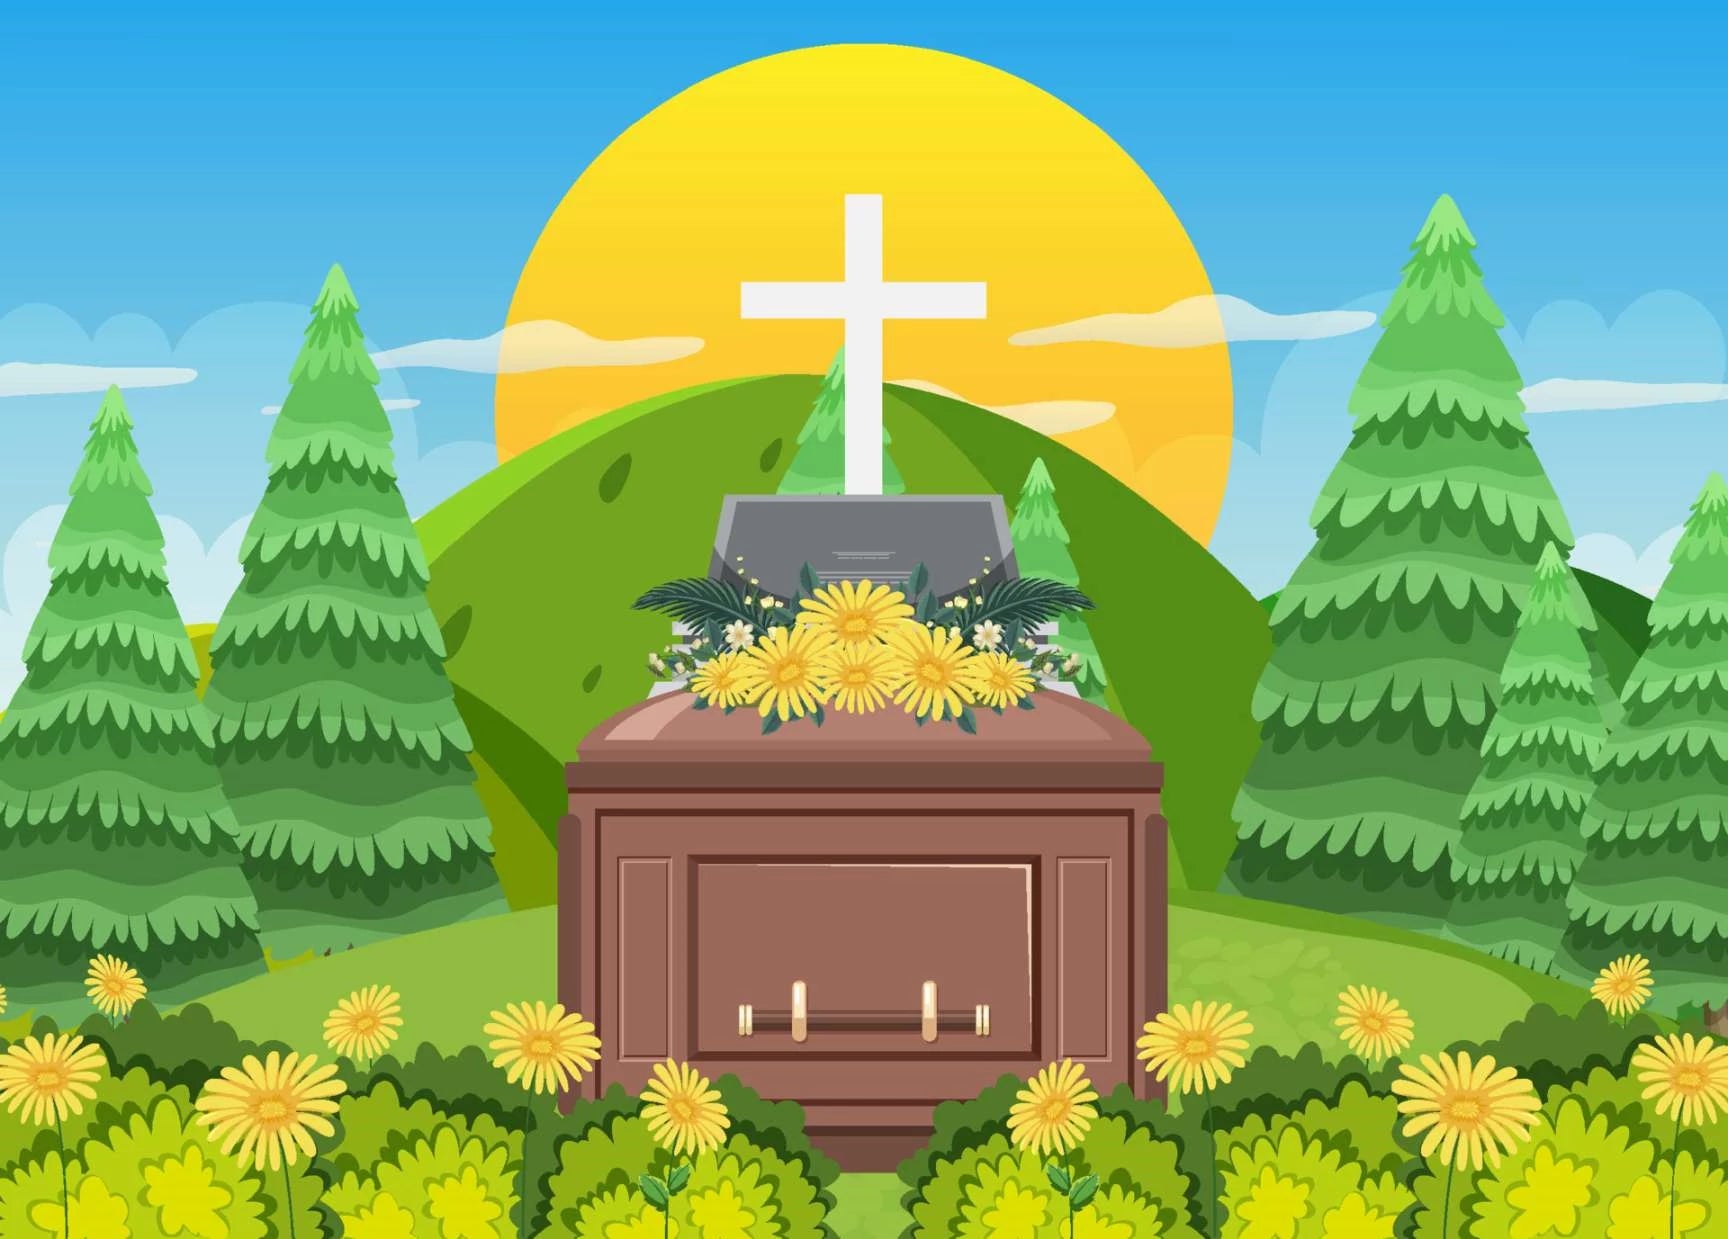 Preplanning your funeral - Caring For Your Loved Ones Beyond The Grave